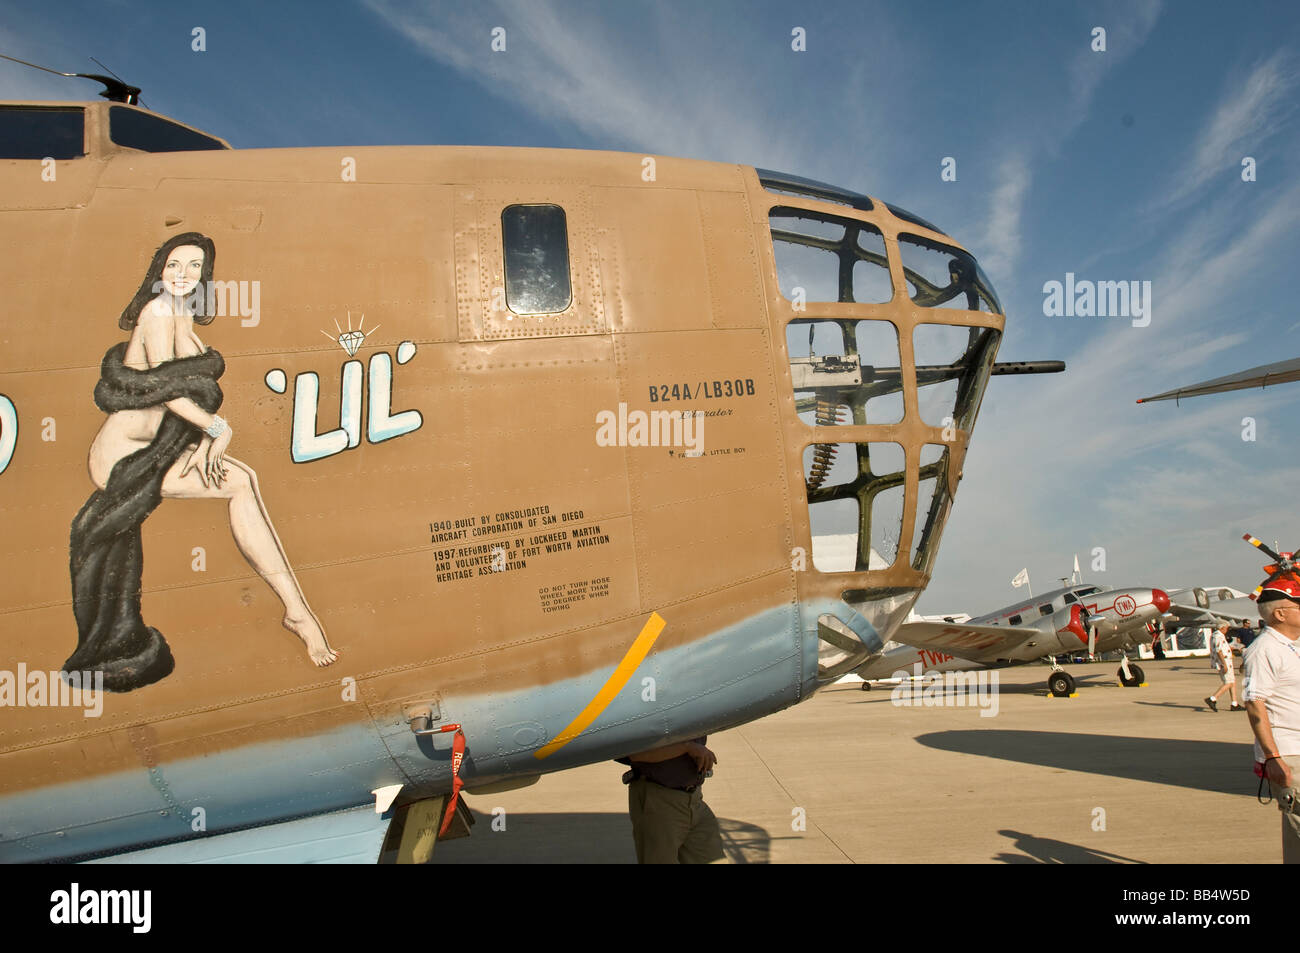 Nose art of Consolidated B-24 Bomber Diamond Lil, reconfigured in 2007 and renamed Ol 927 Stock Photo